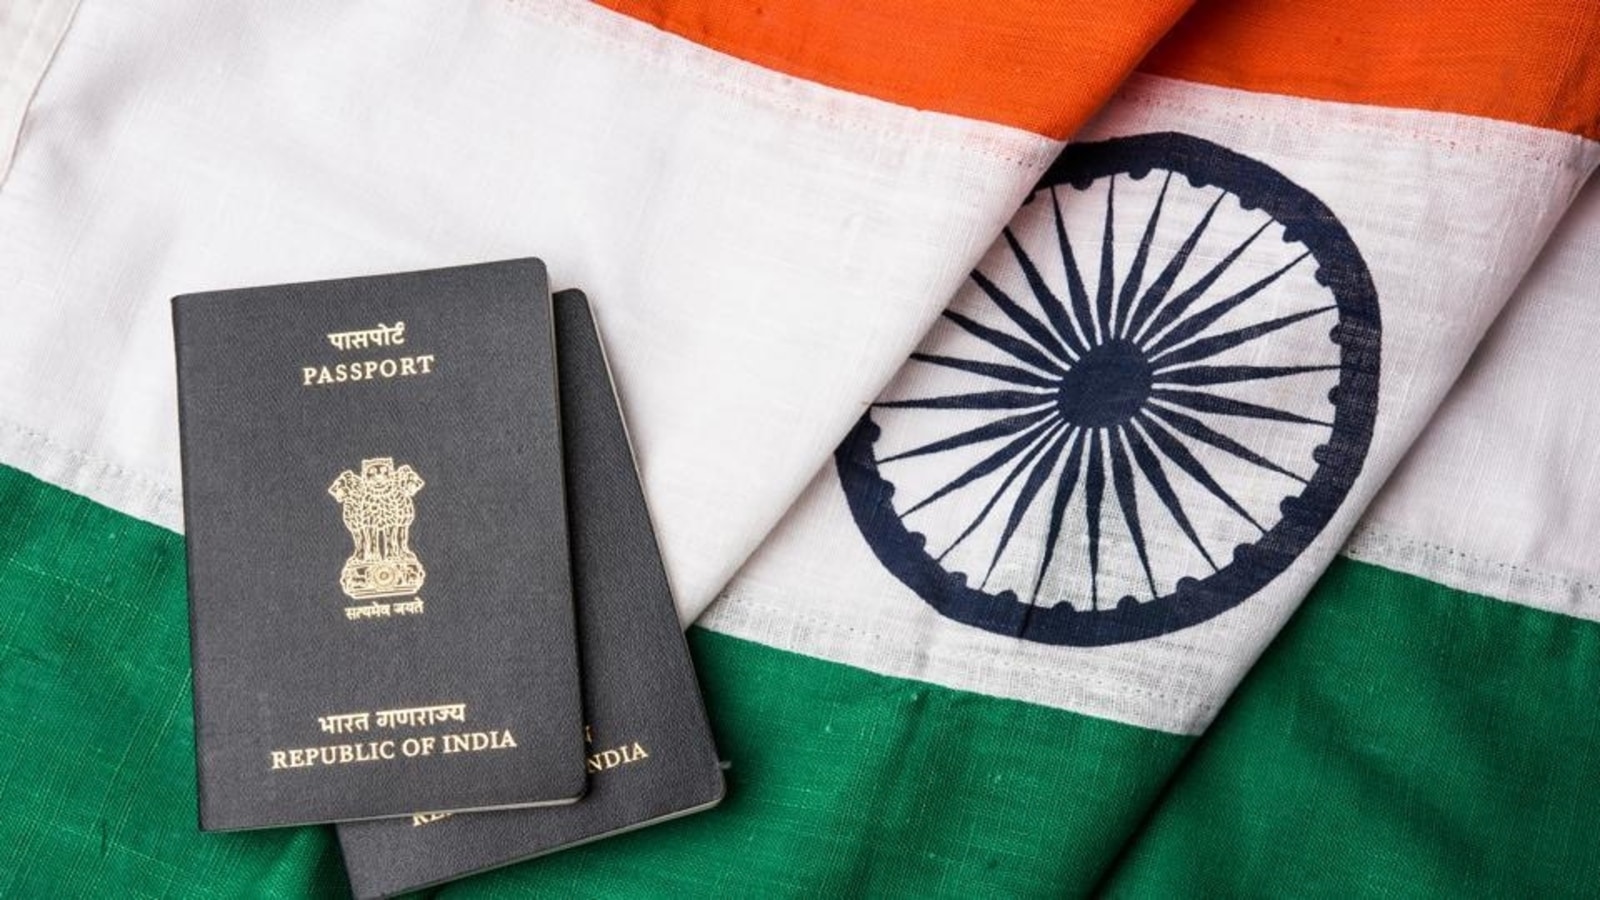 Indian passport gives visa free access to 60 countries. List here